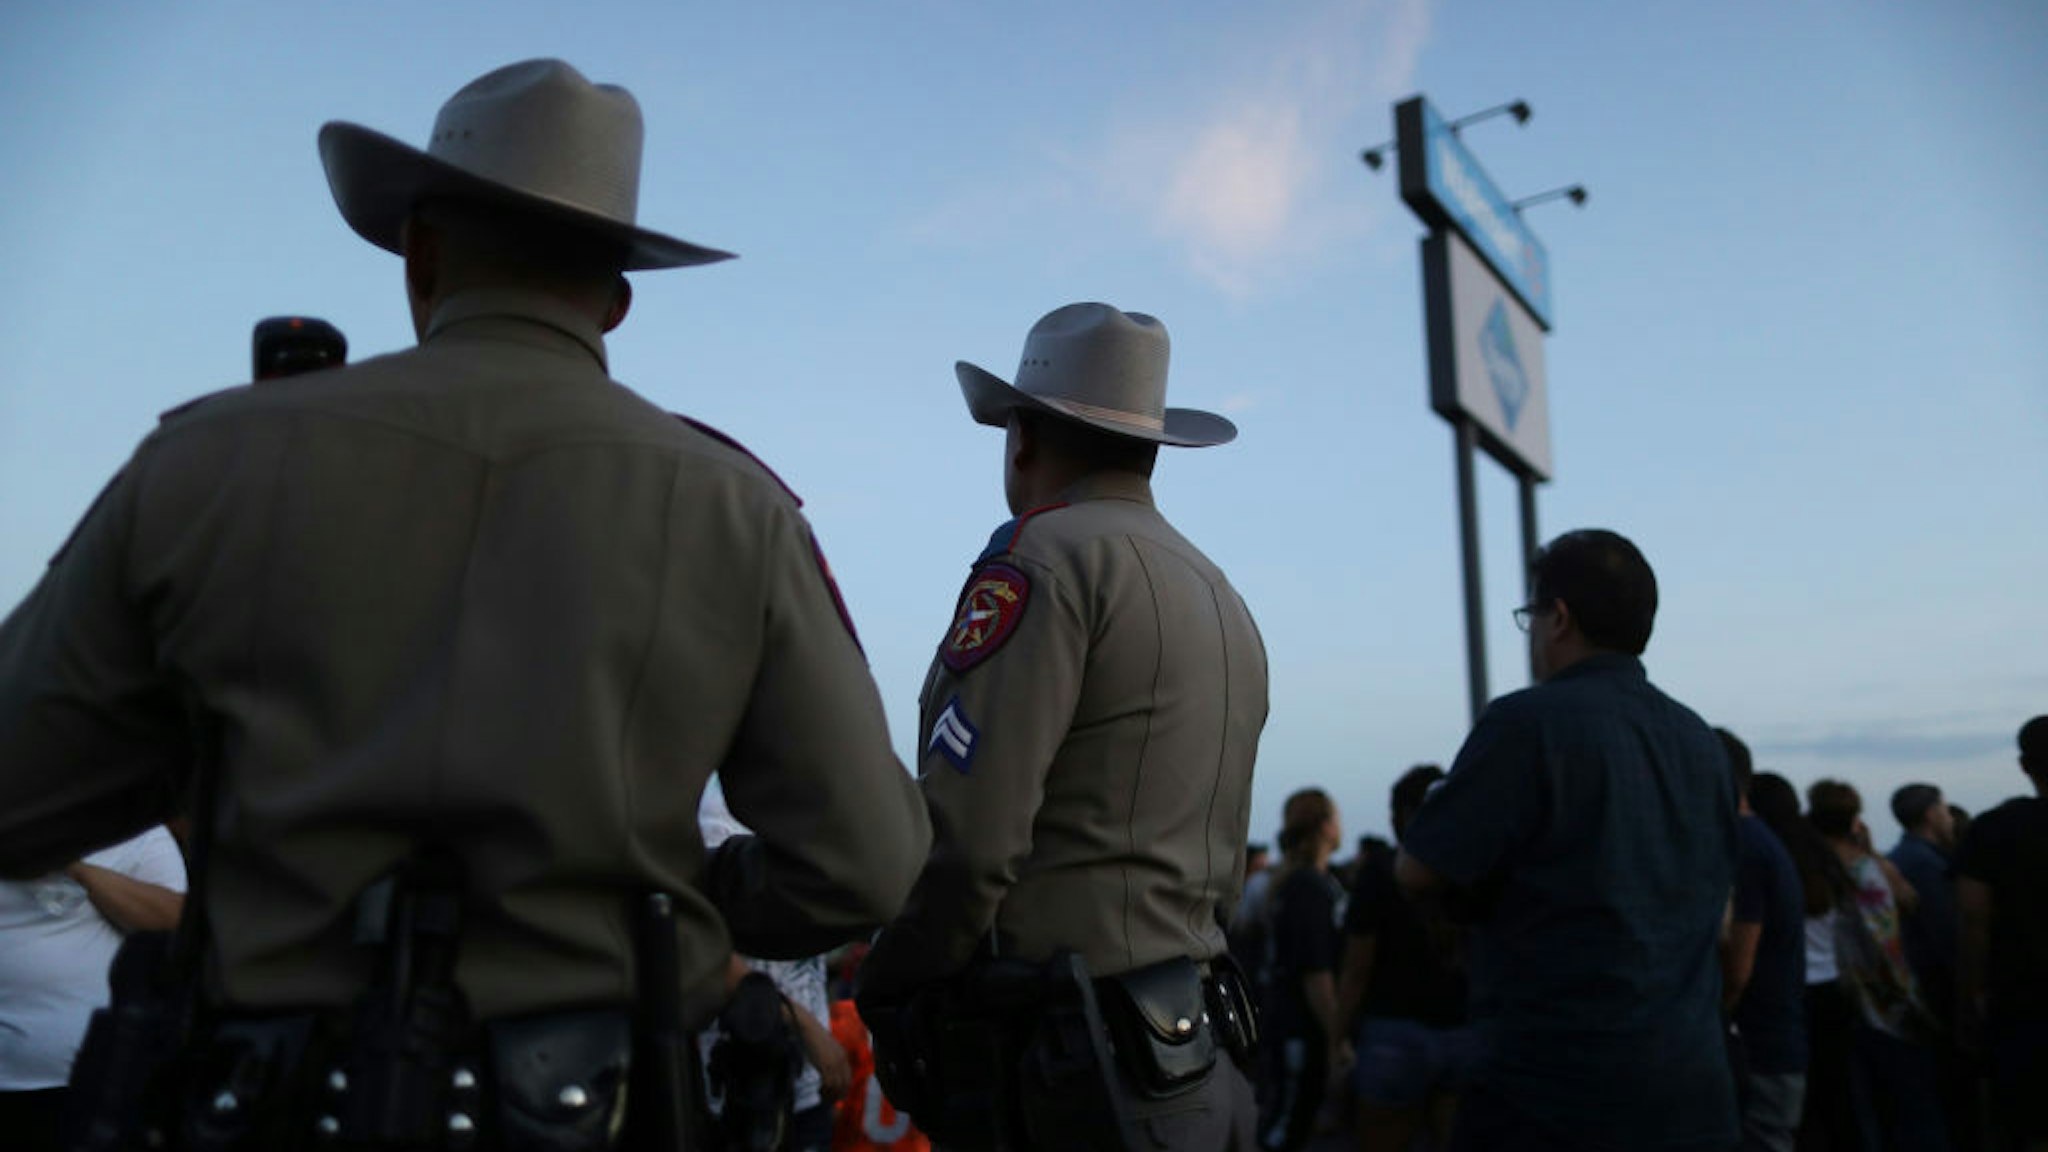 Police keep watch at a makeshift memorial honoring victims outside Walmart, near the scene of a mass shooting which left at least 22 people dead, on August 6, 2019 in El Paso, Texas.